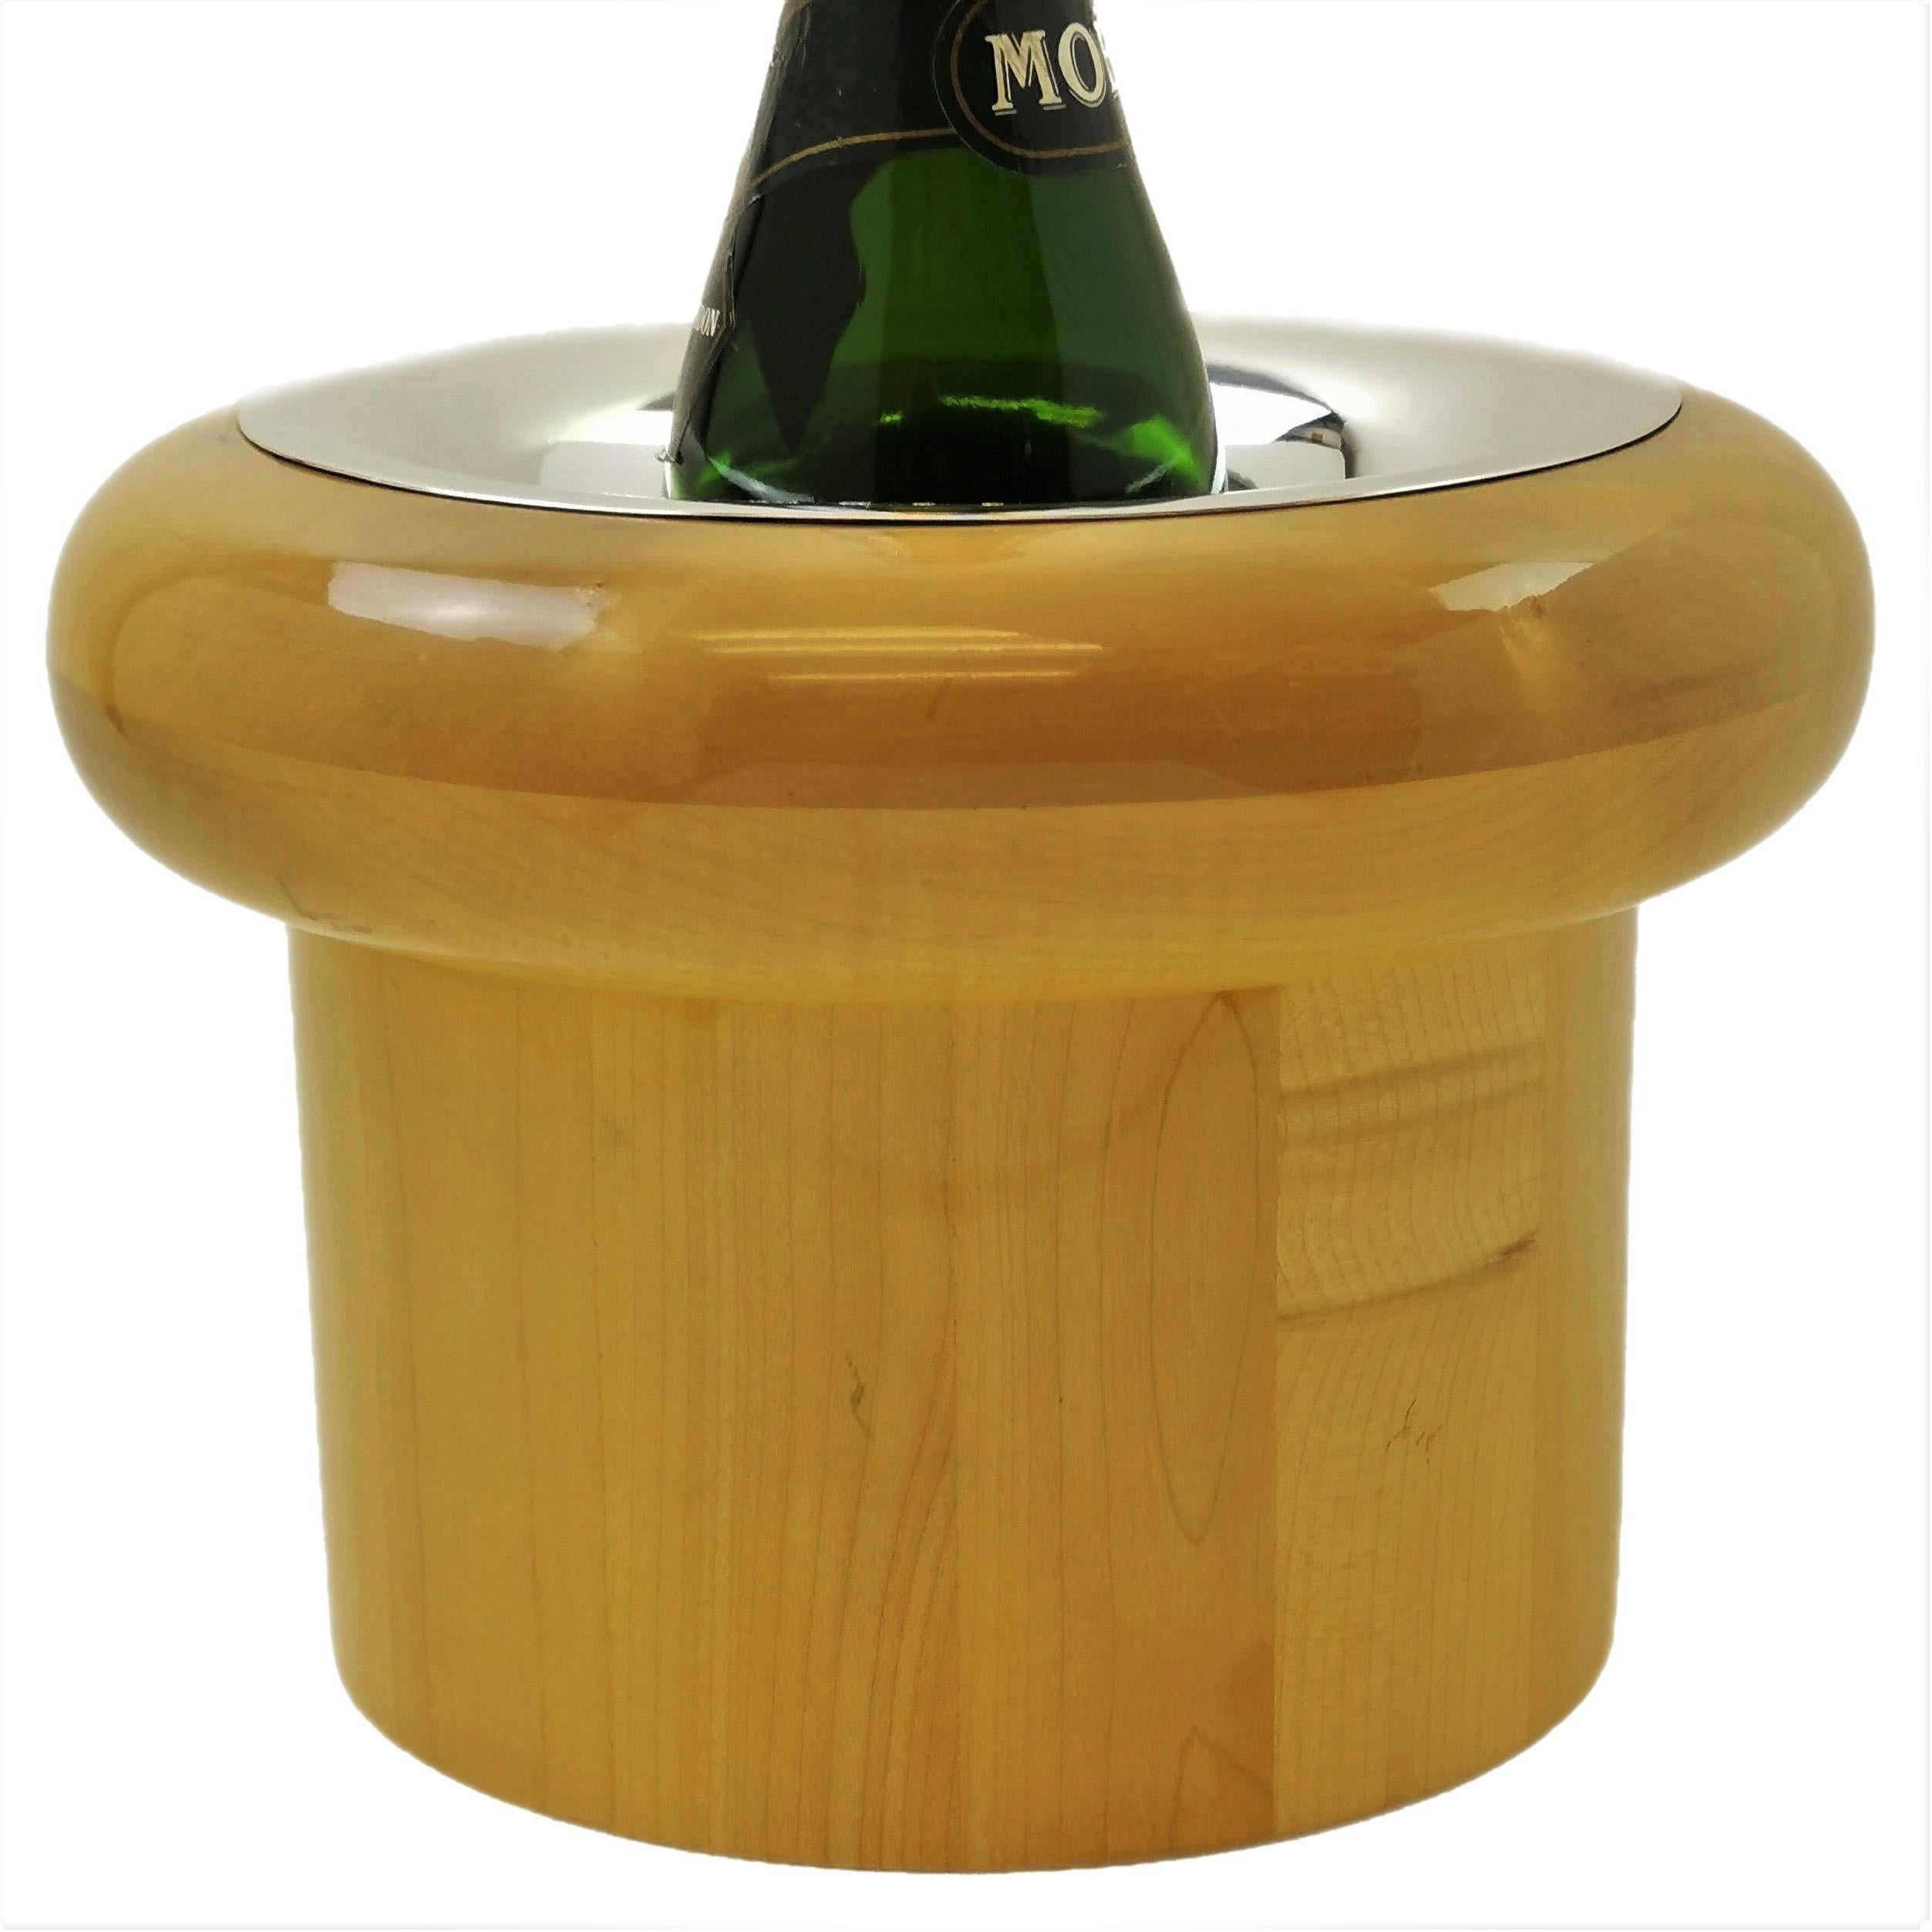 A magnificent modern English Sterling Silver and light wood Wine / Champagne Cooler by noted Silversmith Gerald Benney. The body of the Wine Cooler is a striking light wood and the rim and interior of the Cooler are created in solid silver.
The Wine